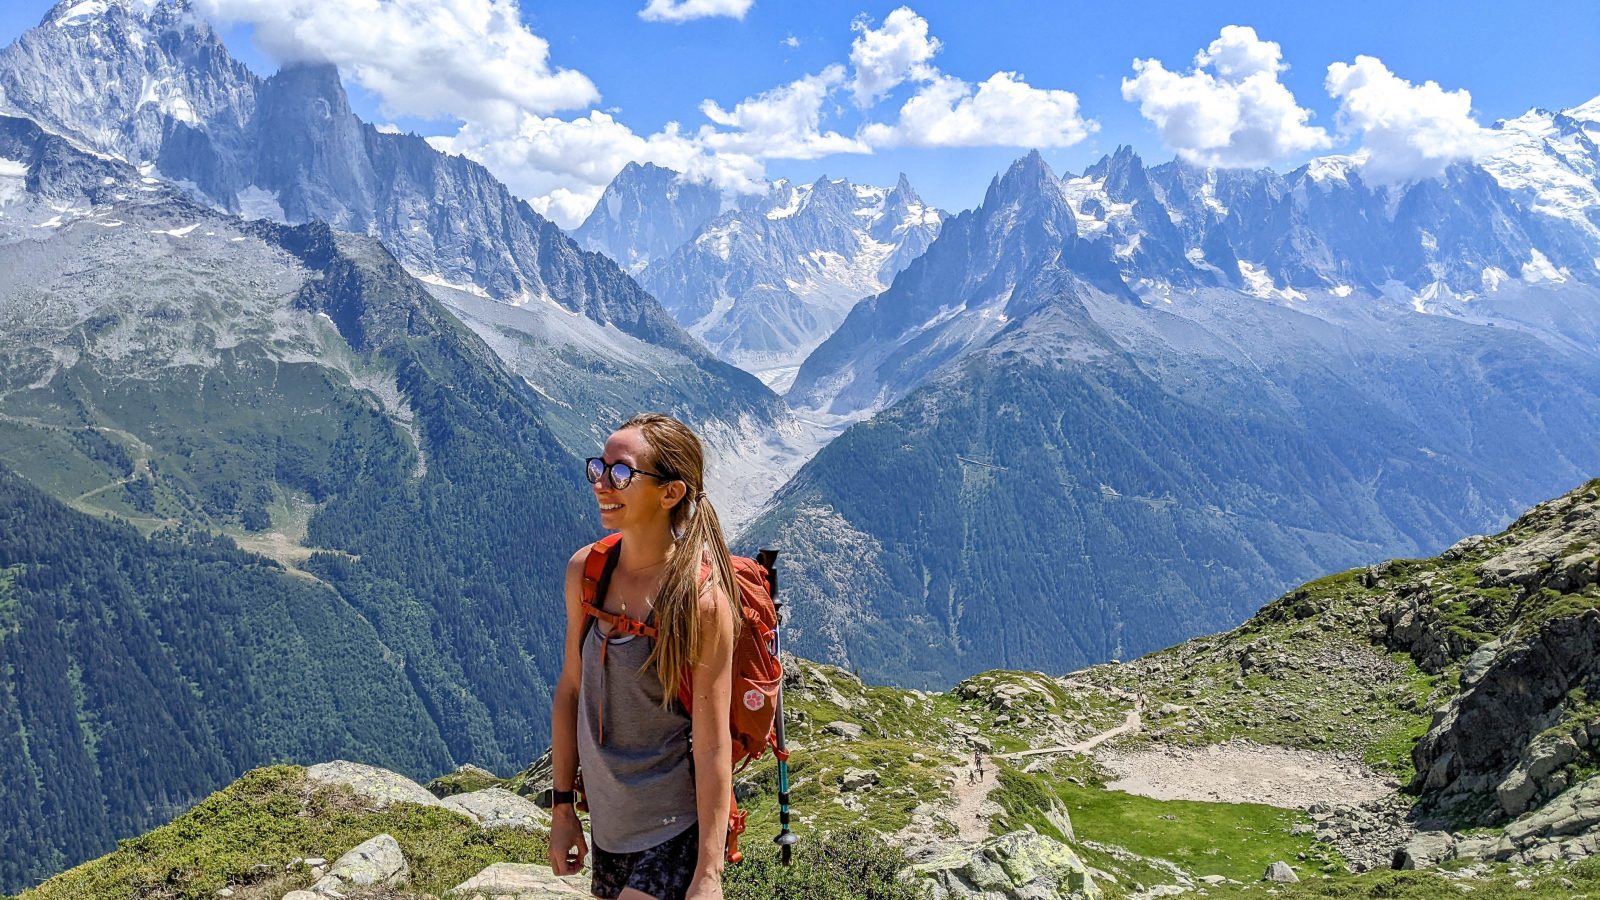 10 useful information and tips on the Tour du Mont Blanc (TMB)